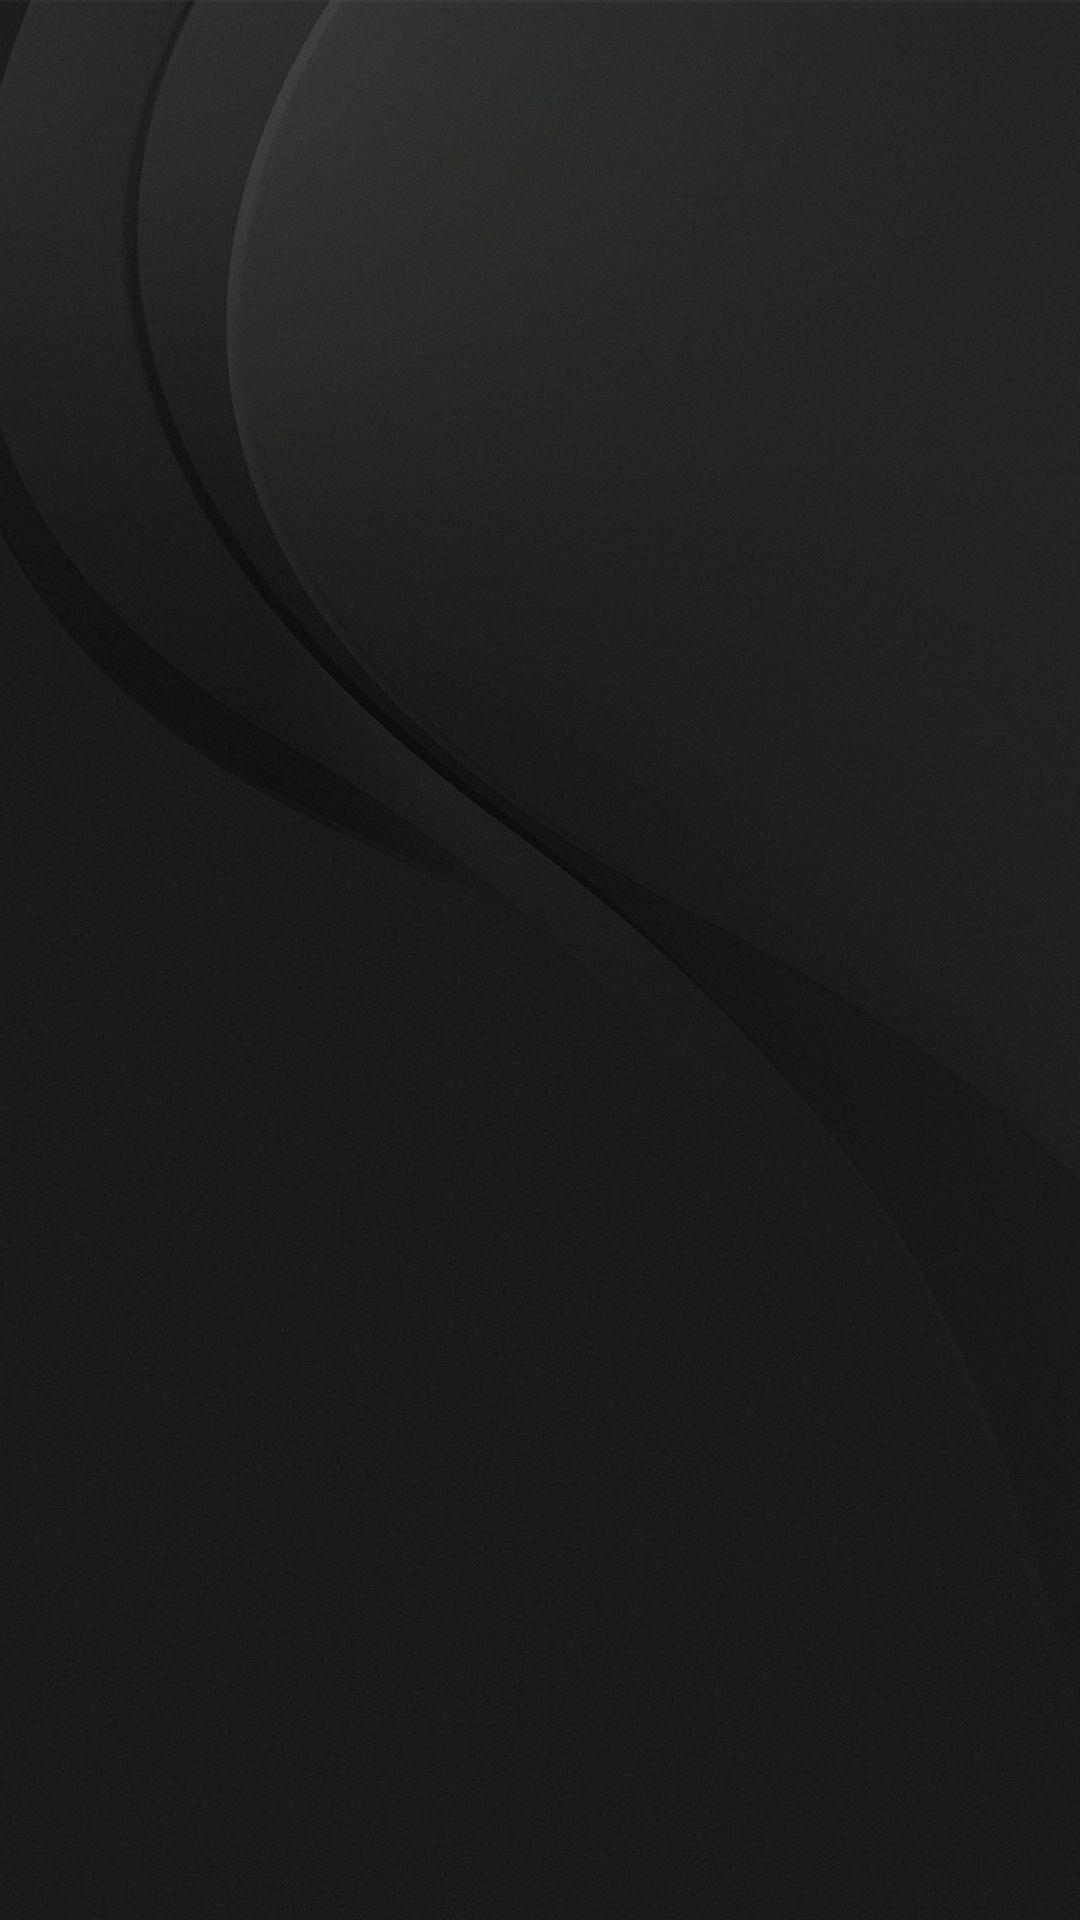 HD Black Wallpapers For Mobile - Wallpaper Cave